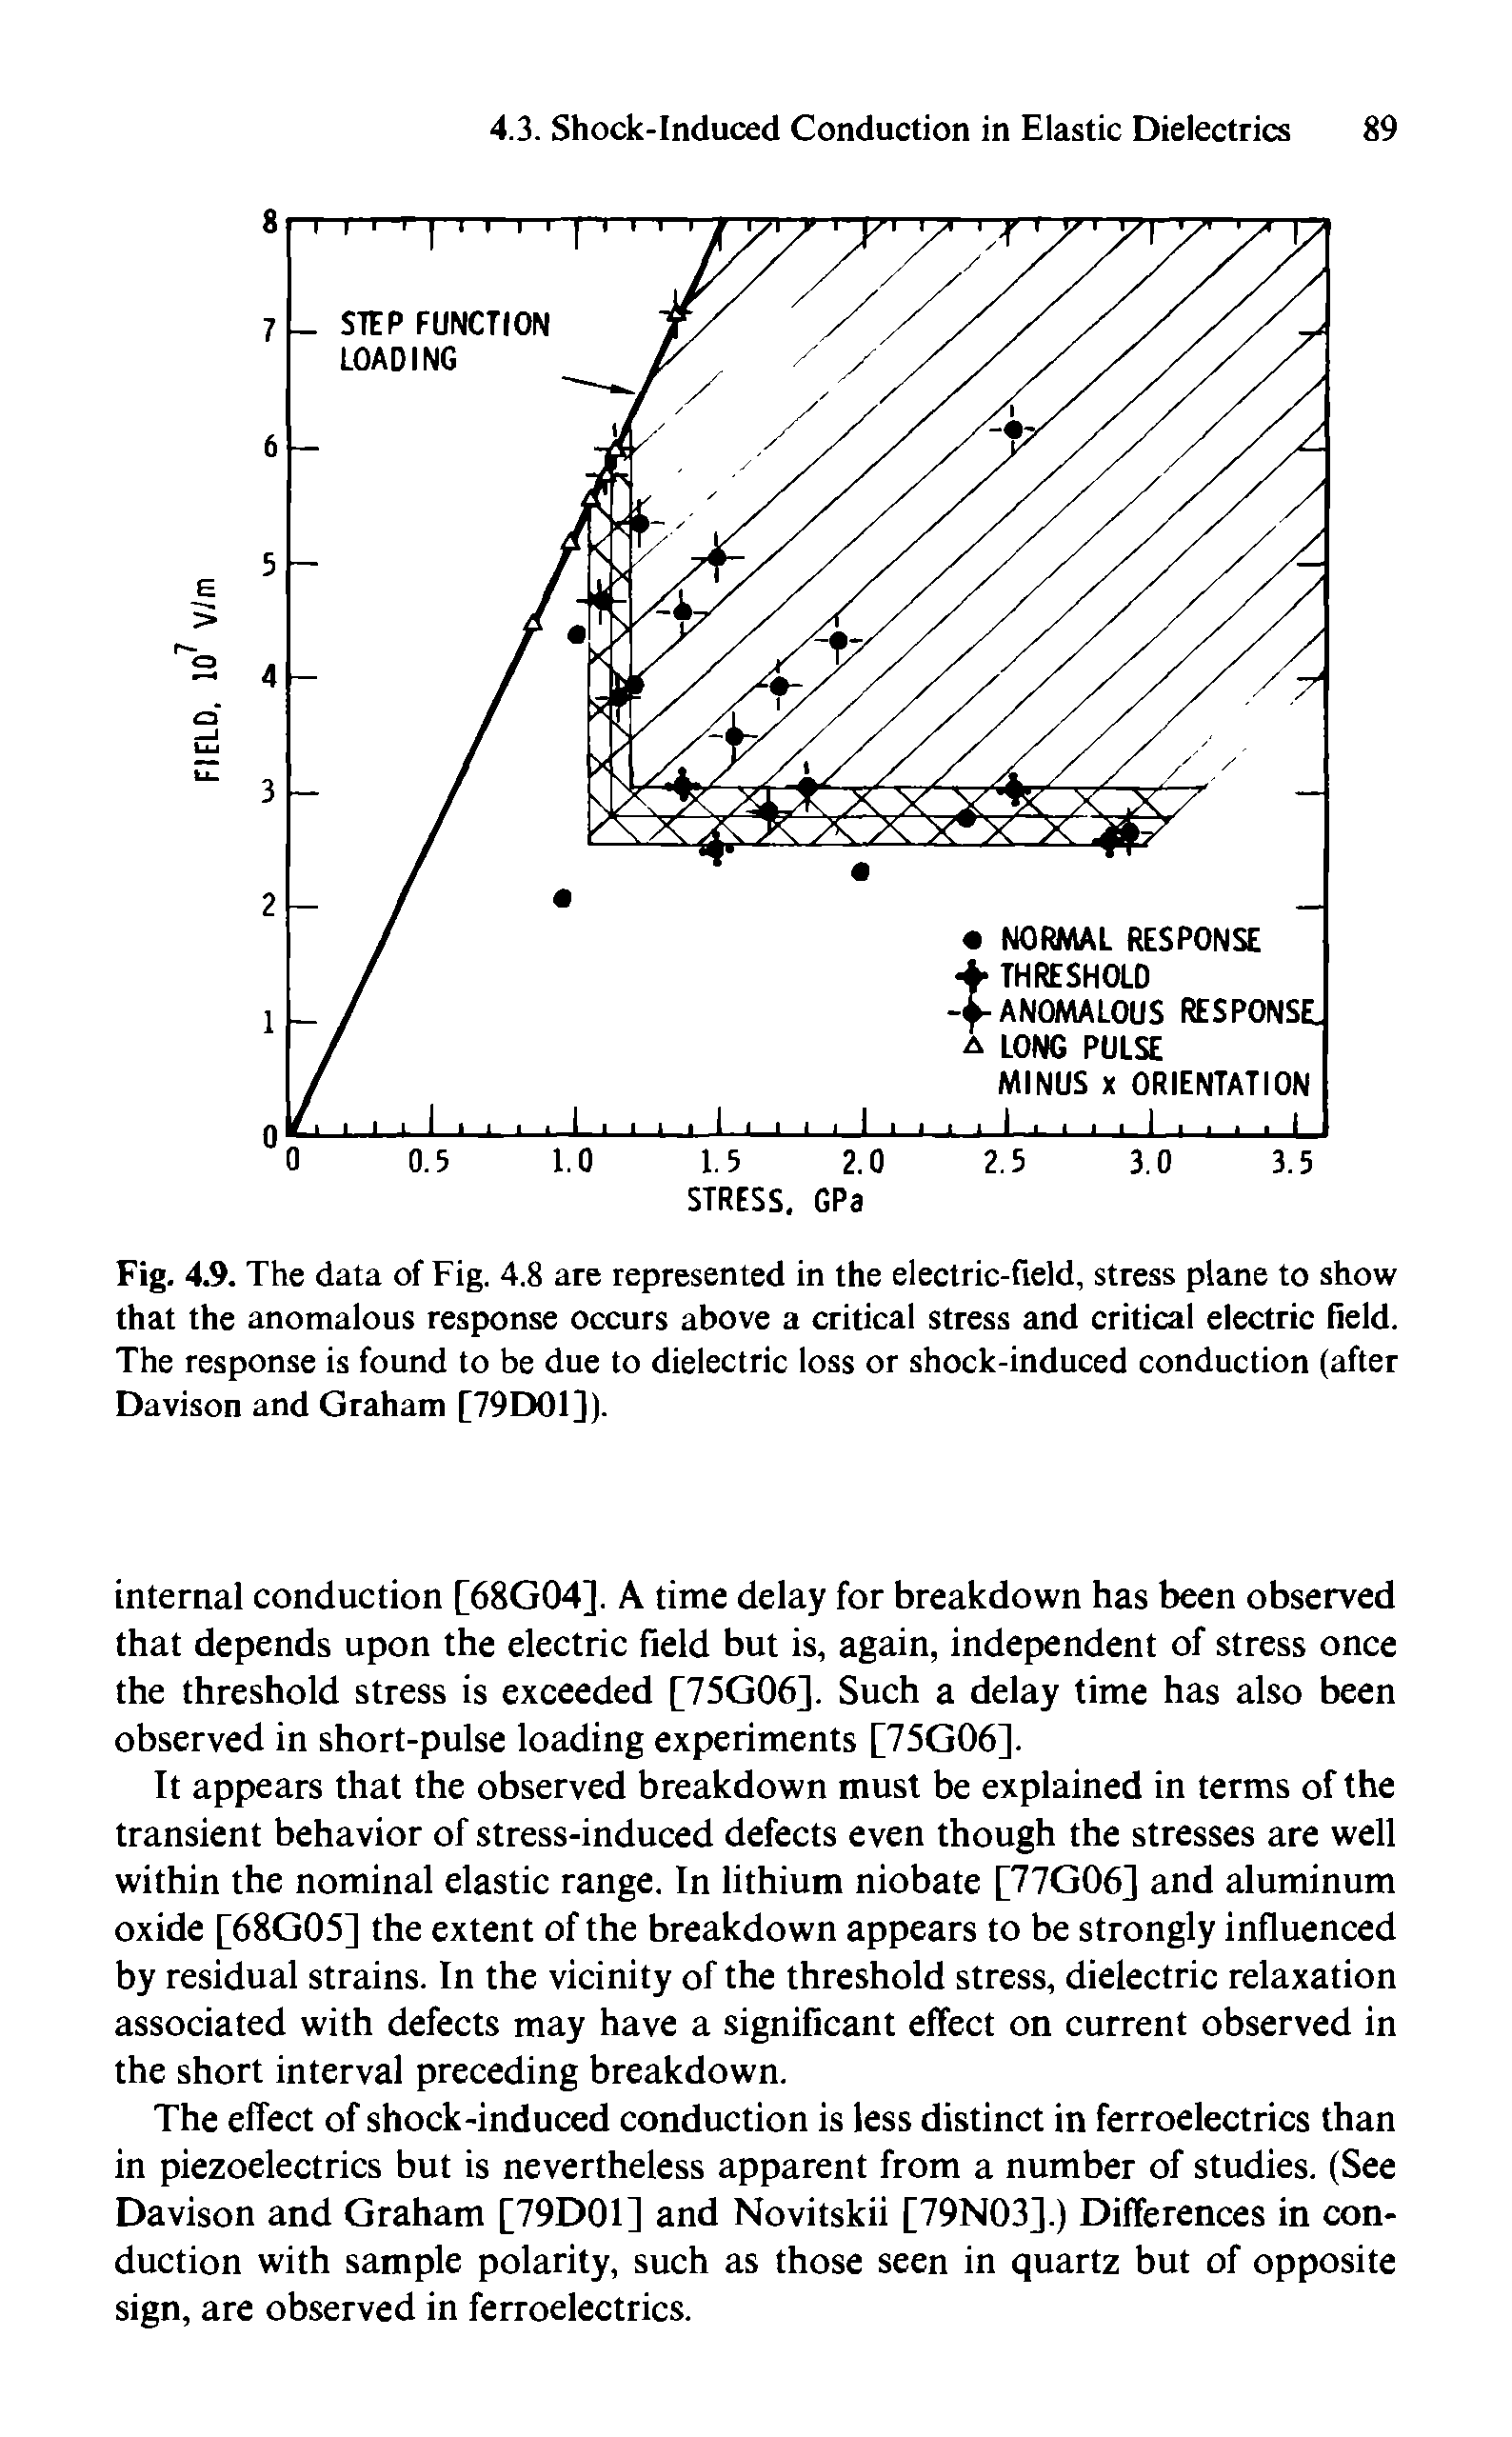 Fig. 4.9. The data of Fig. 4.8 are represented in the electric-field, stress plane to show that the anomalous response occurs above a critical stress and critical electric field. The response is found to be due to dielectric loss or shock-induced conduction (after Davison and Graham [79D01]).